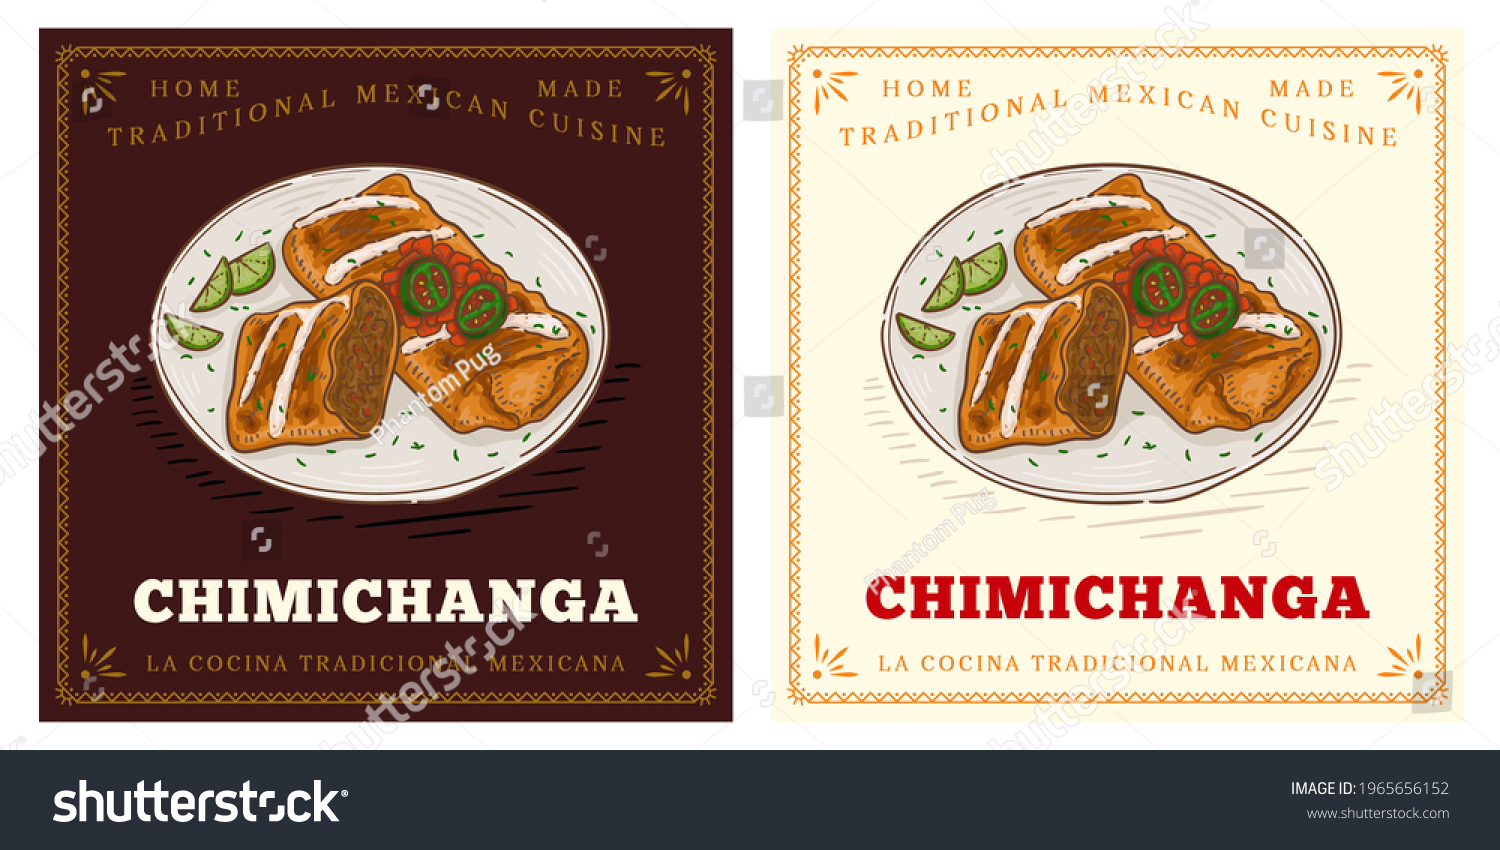 SVG of Chimichanga Illustration, a traditional Mexican dish made of a deep-fried burrito, tortilla with rice, cheese, beans, meat. svg